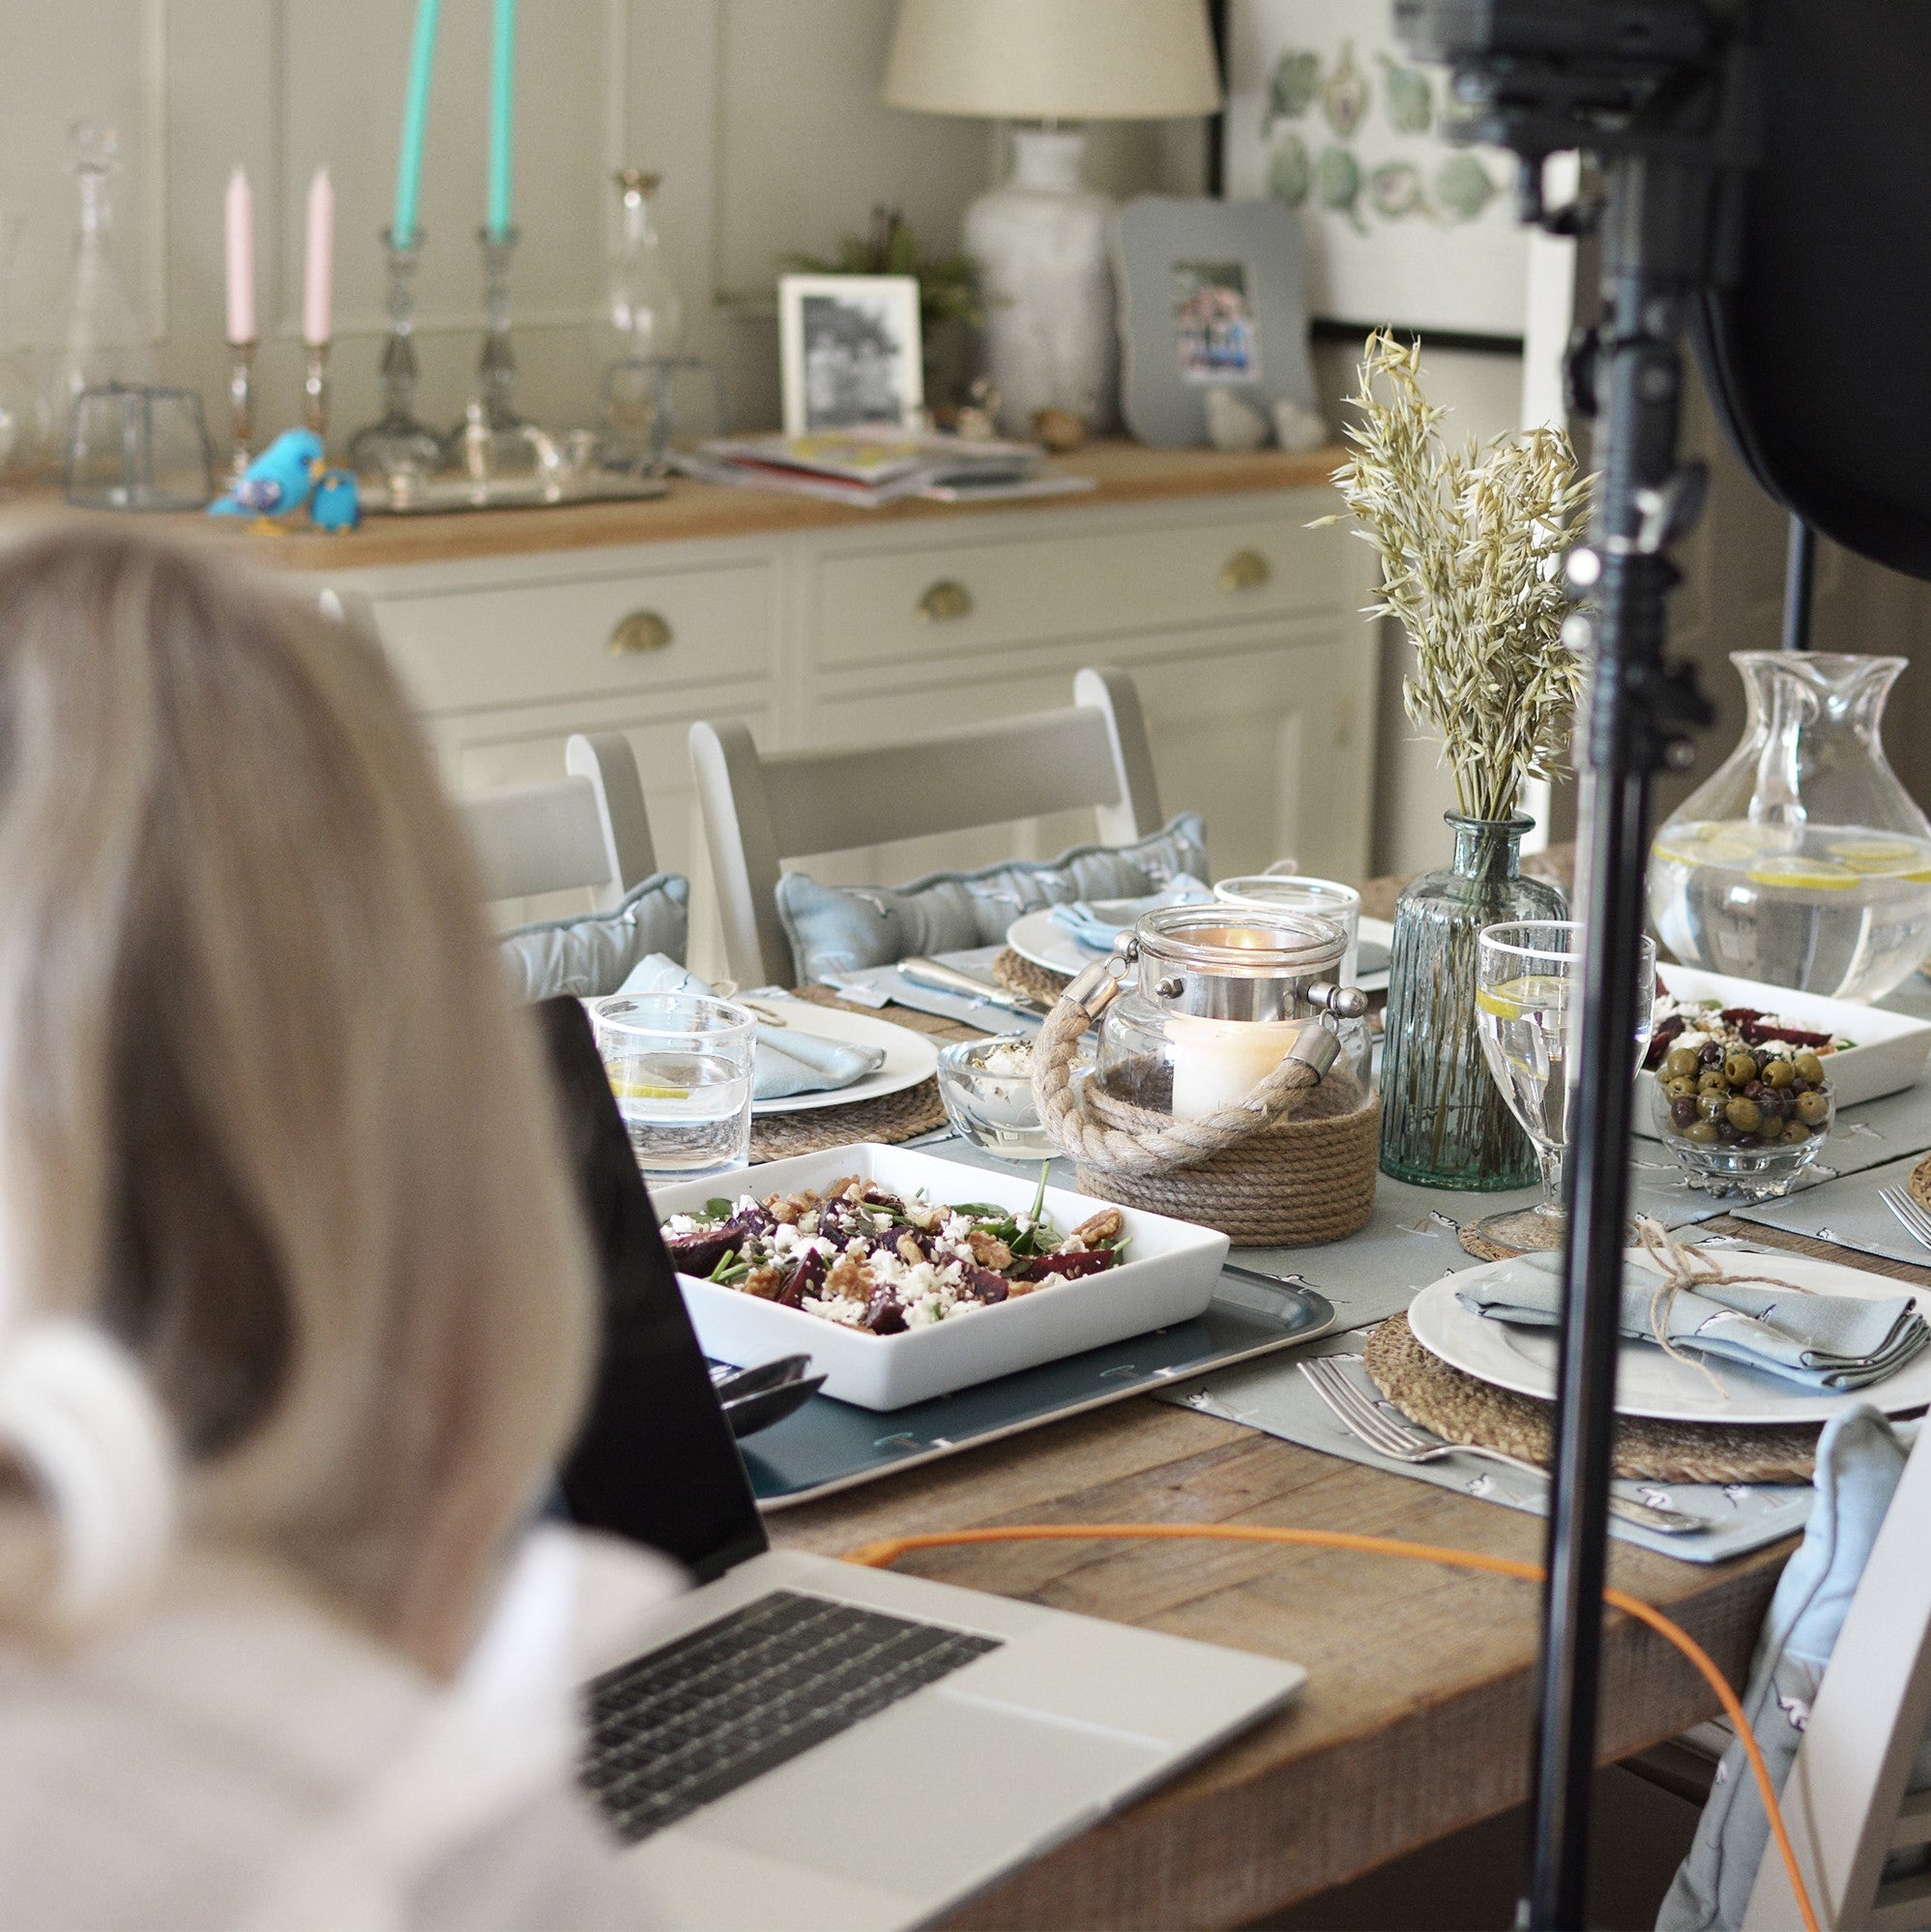 We step behind the scenes at Sophie Allports new coastal collection which features Avocets on a sea-blue background. We see our photographer capturing a coastal table setting.